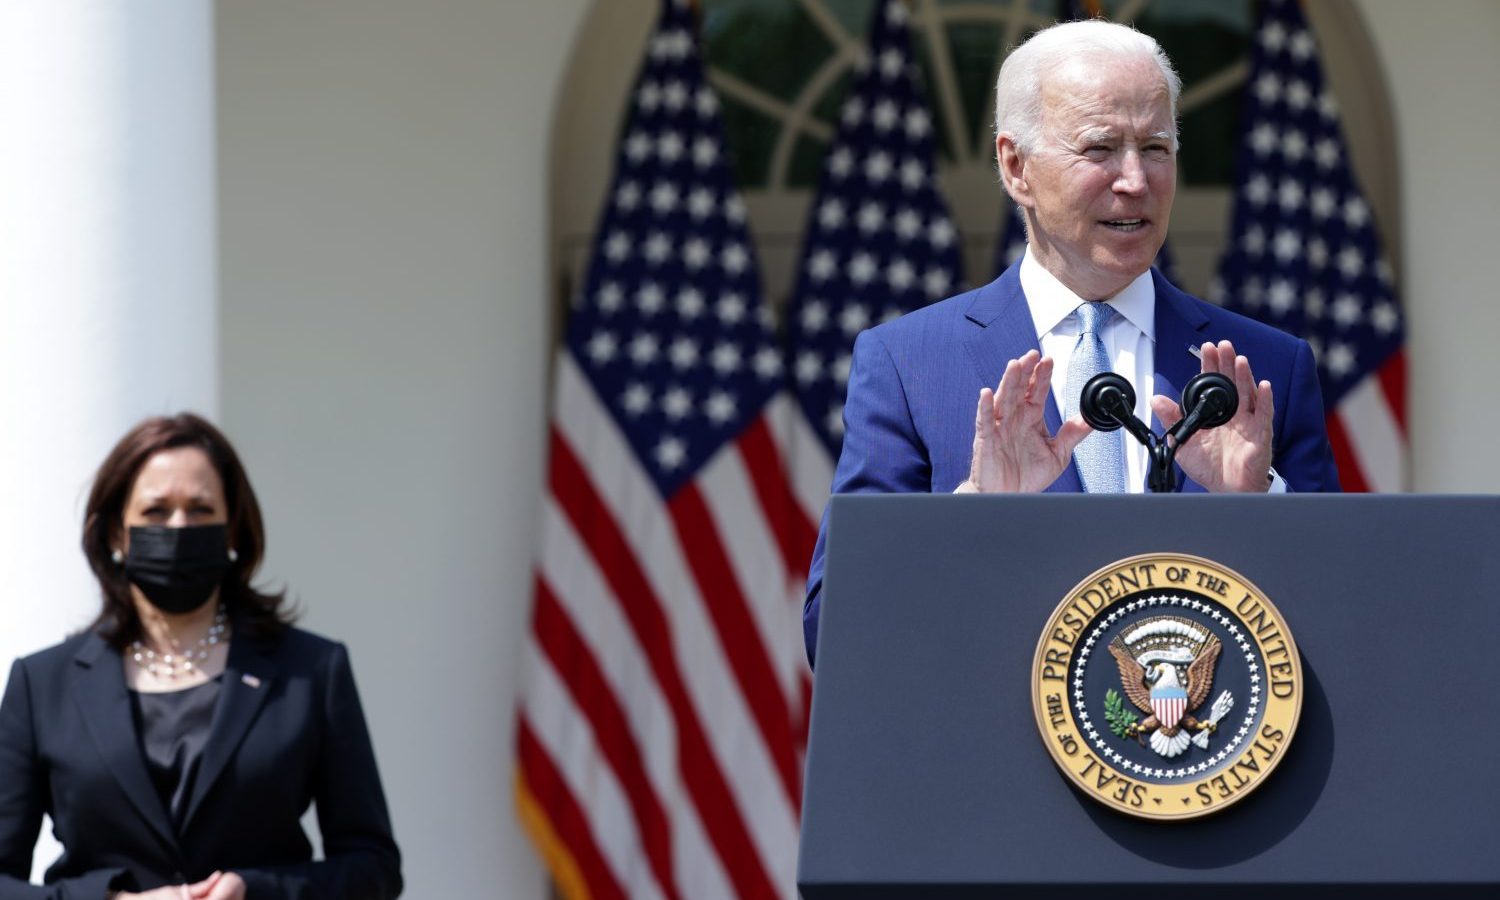 President Biden Is Too Busy To Legalize Cannabis? That's What VP Harris Claims